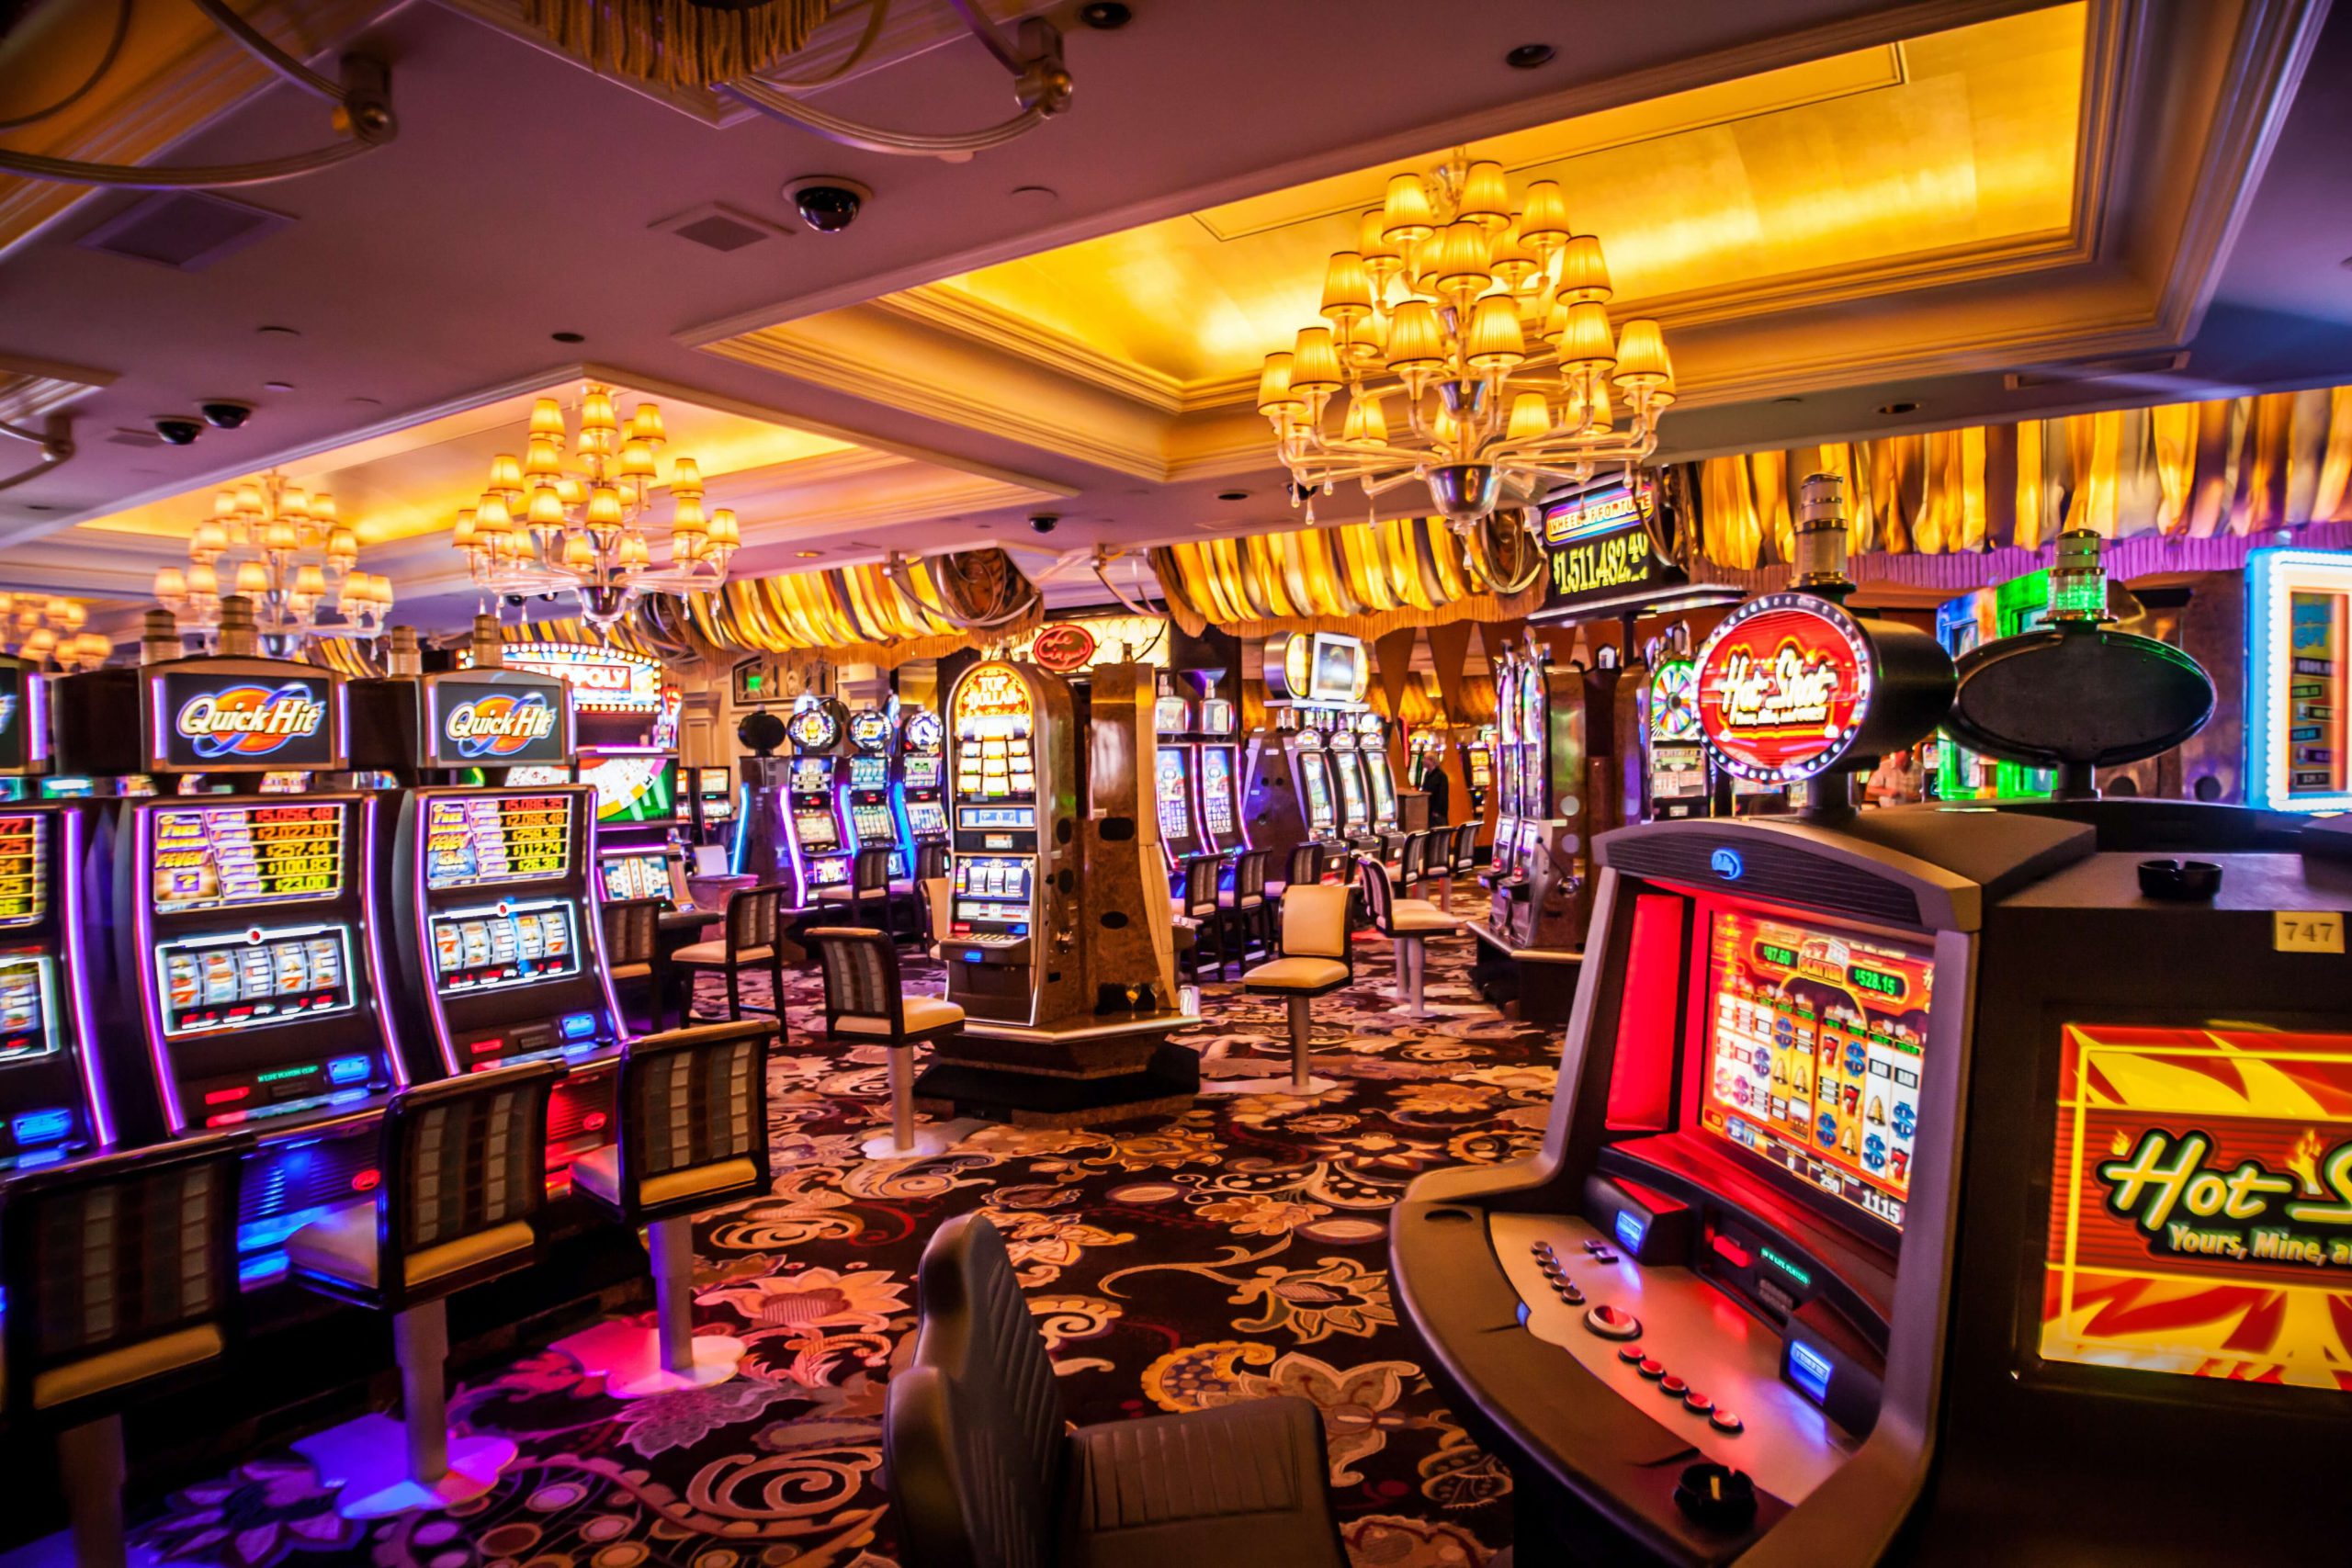 Here is a list of things you should really consider before playing online casino games